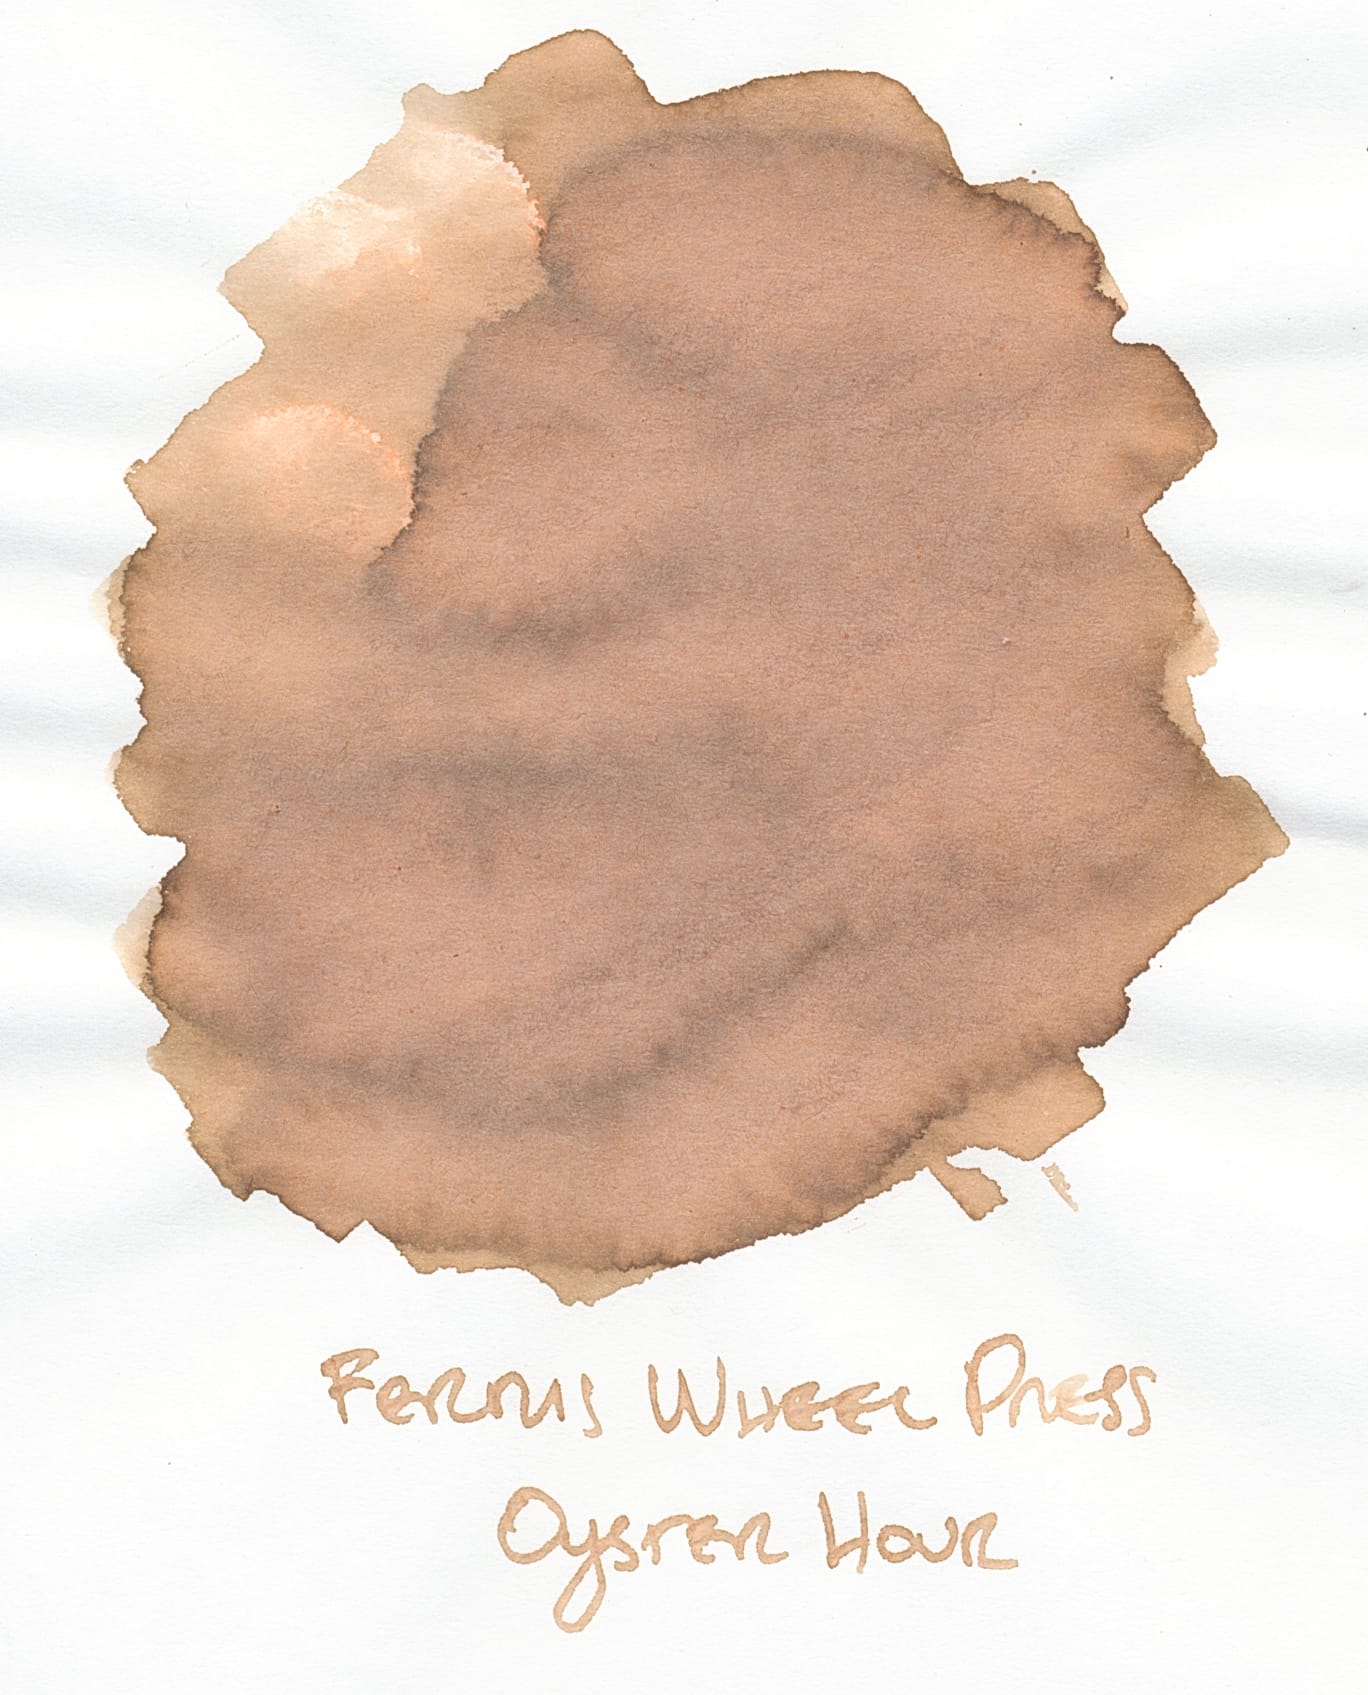 Swatch of a medium brown ink that looks more like an opaque beige color than the translucent brown of the Sesame Oil ink, labeled "Ferris Wheel Press Oyster Hour" underneath the swatch